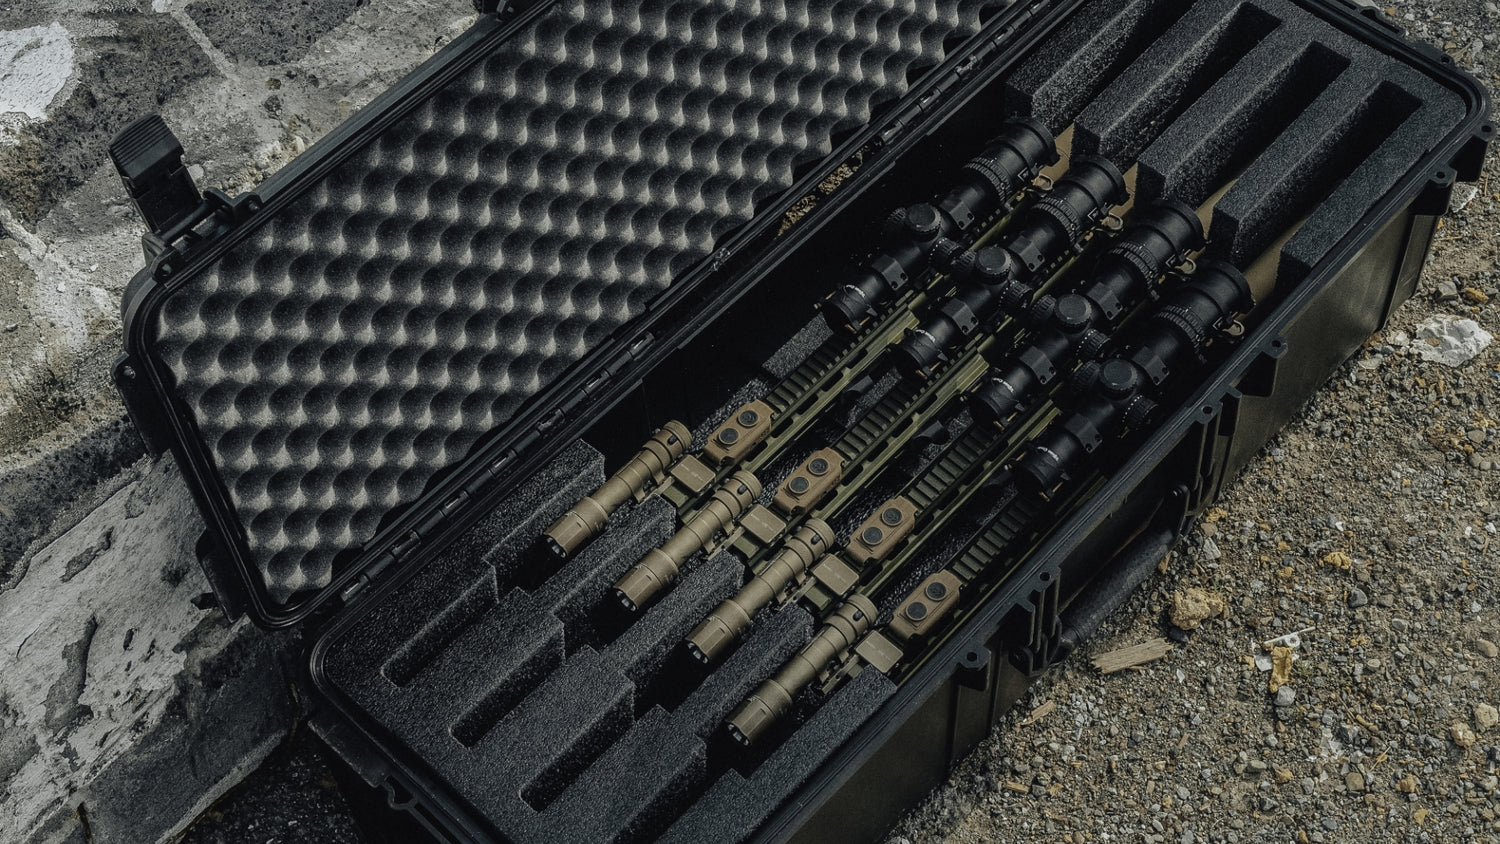 The Role of Waterproof Hard Cases in Firearm Safety